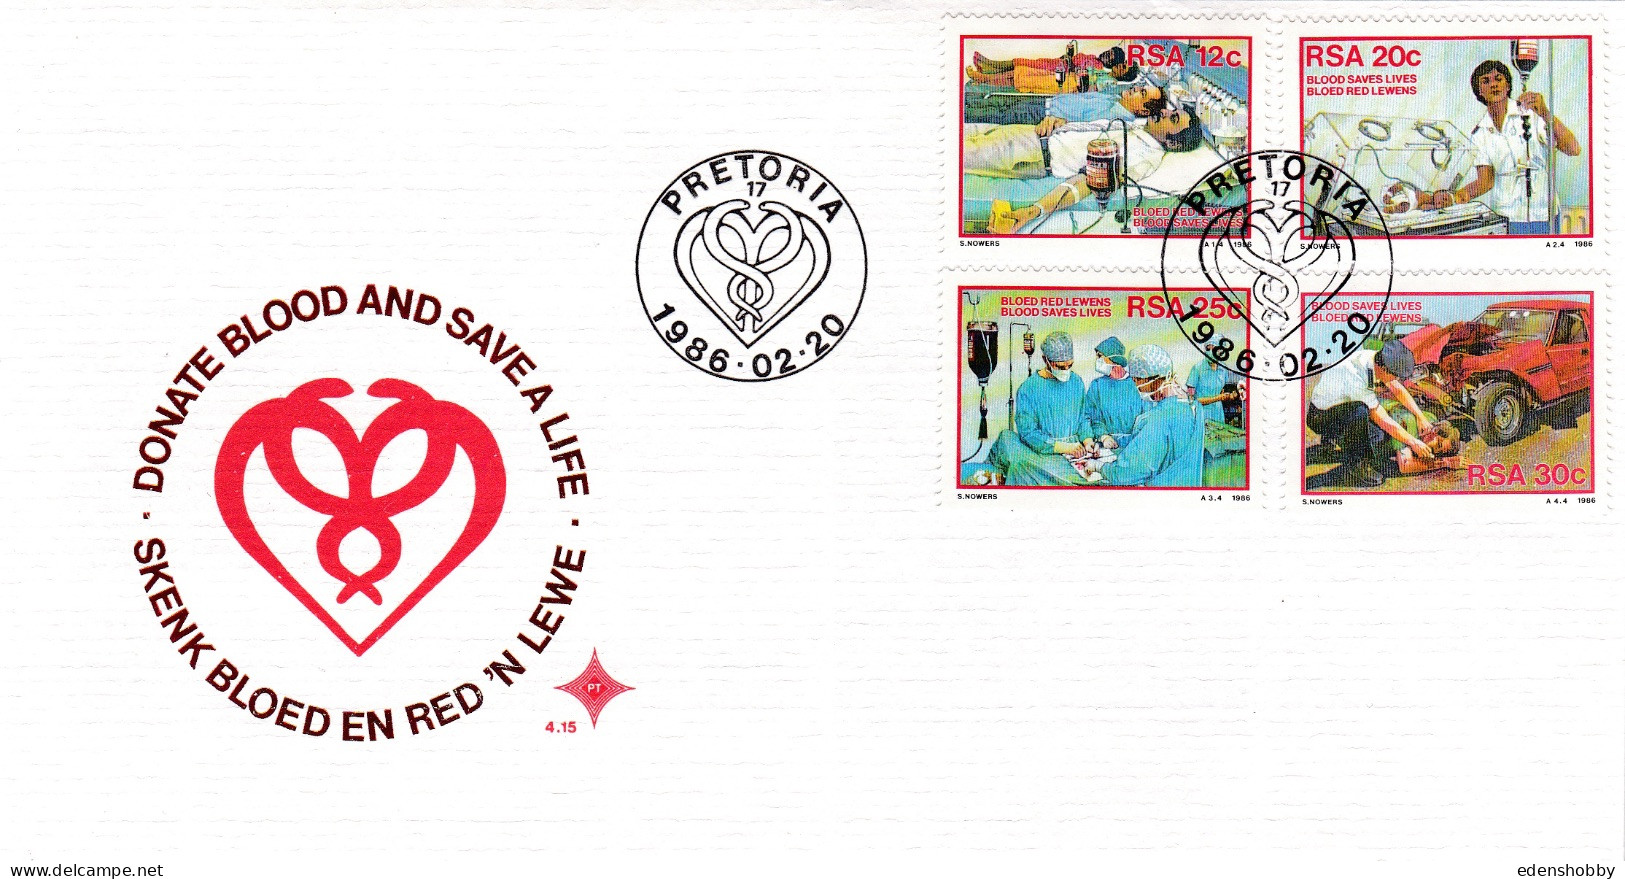 1986 SOUTH AFRICA RSA 7 Official First Day Covers FDC 4.15, 4.15.1, 4.16, 4.16.1, 4.17, 4.18. 4.19 - Covers & Documents